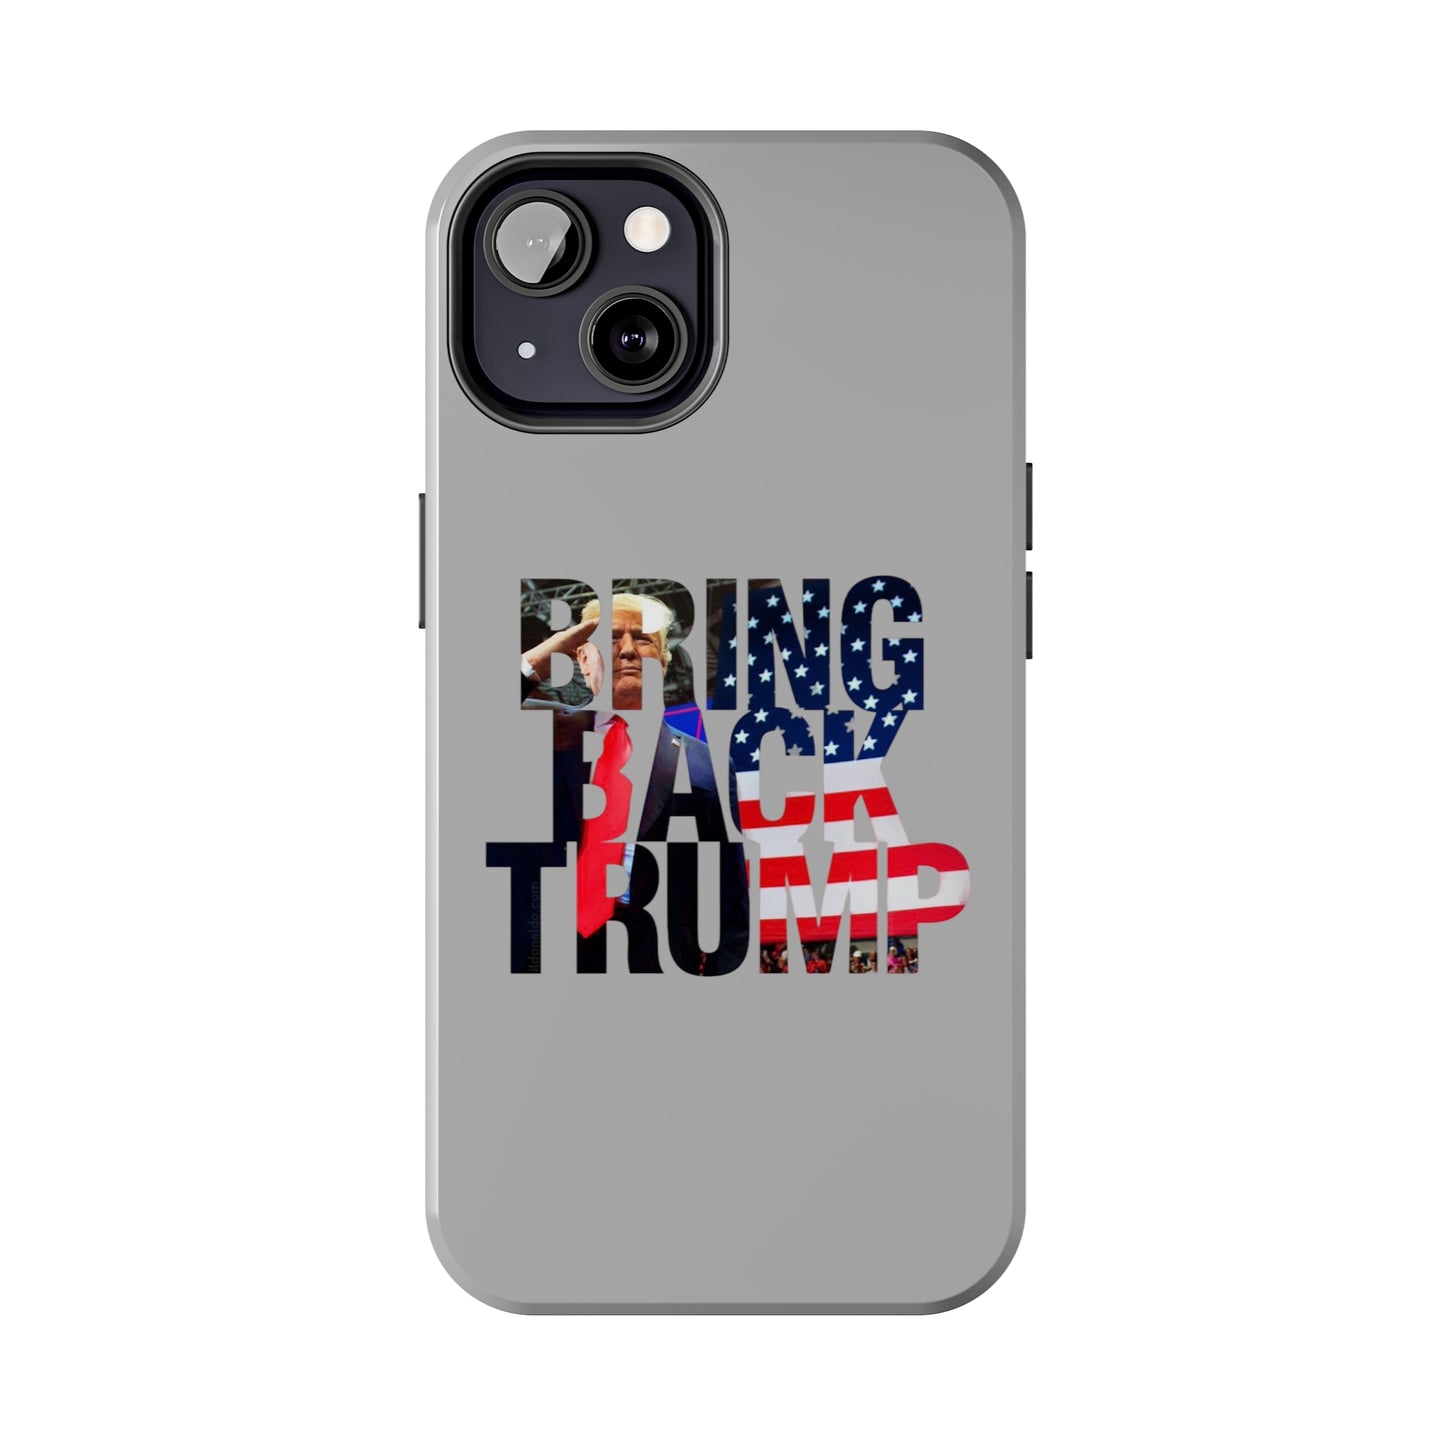 Bring Back Trump Gray Apple iPhone Tough Phone Cases